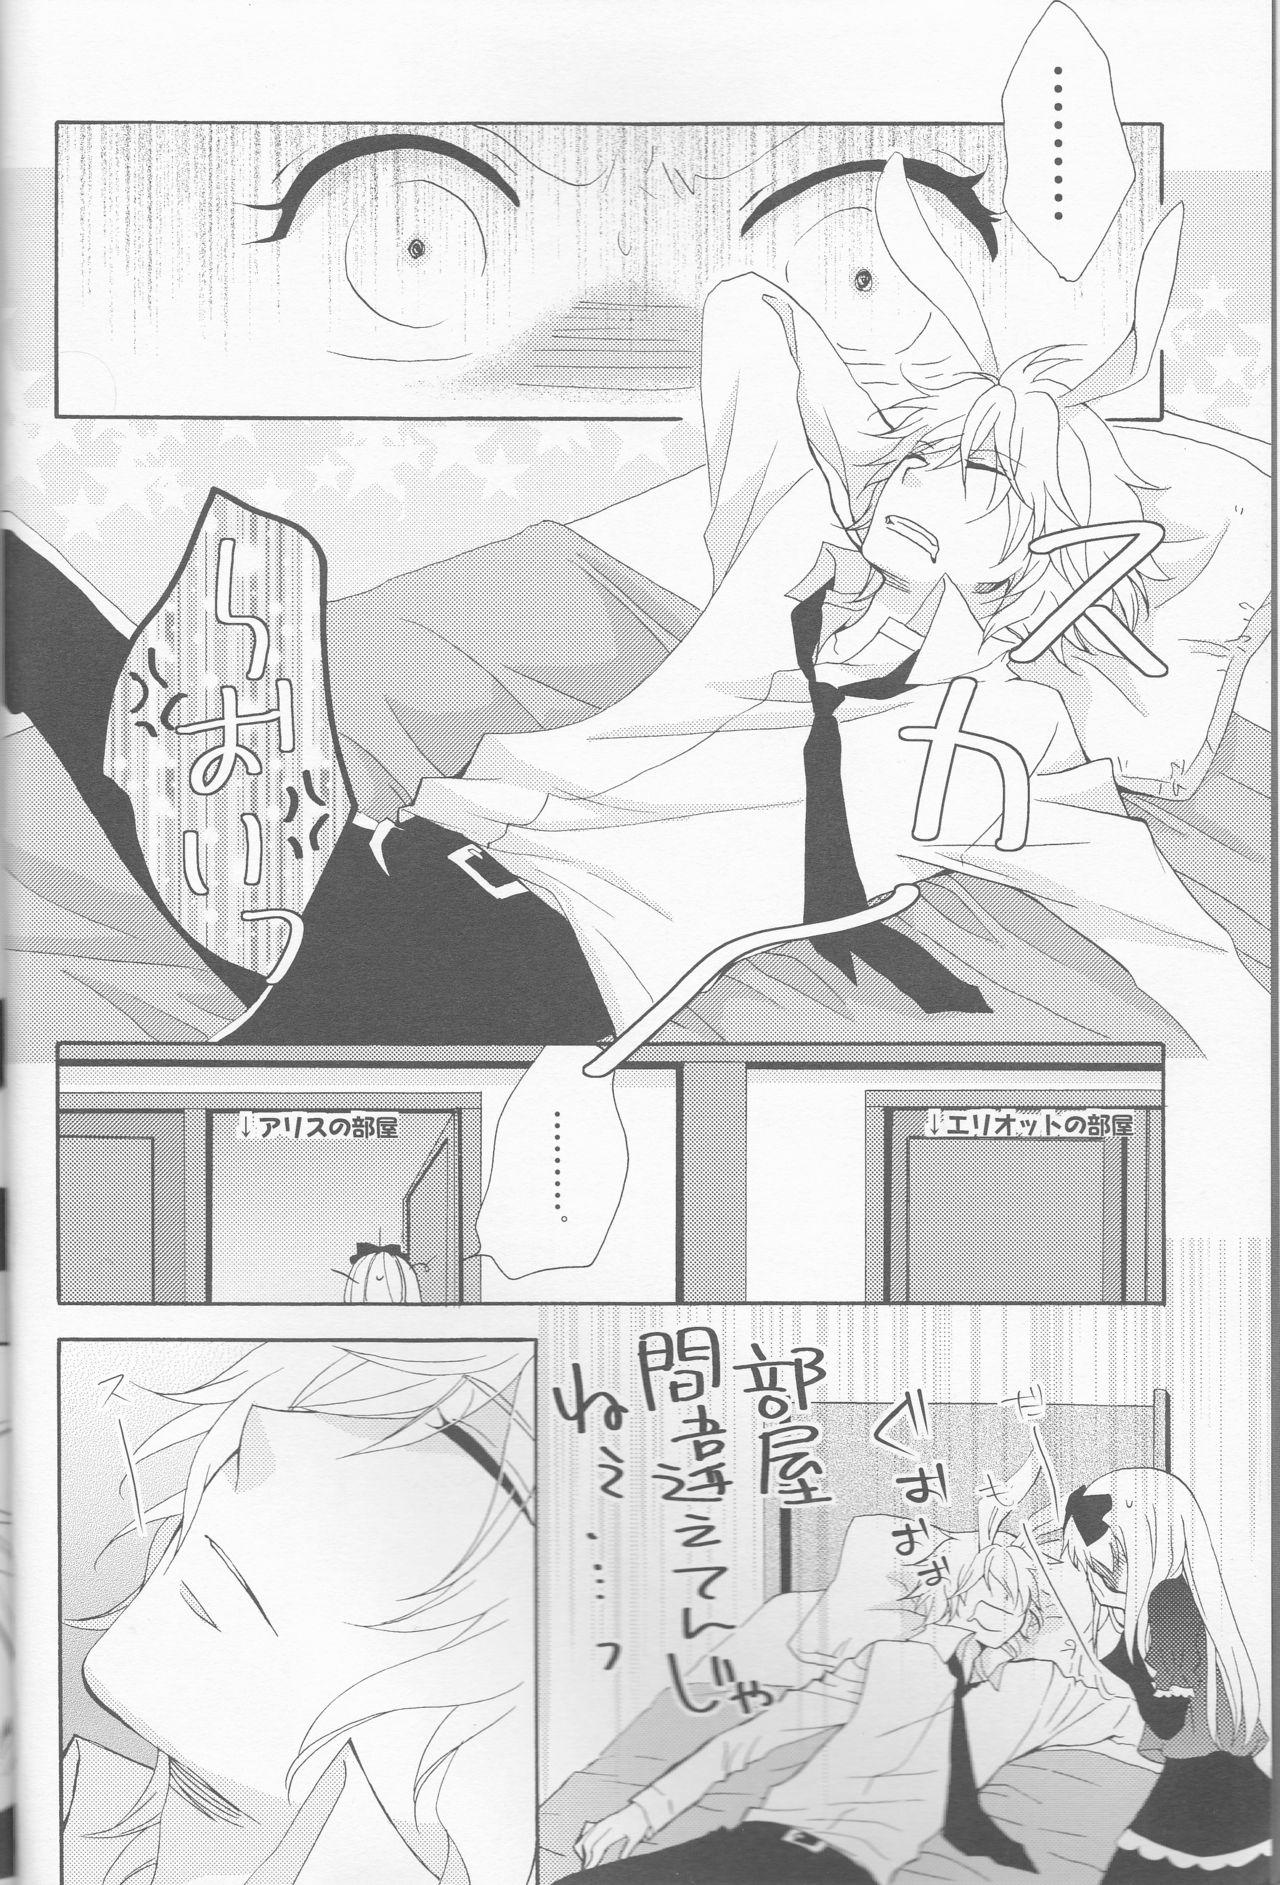 Best Blow Job liberator - Alice in the country of hearts Stepdaughter - Page 6